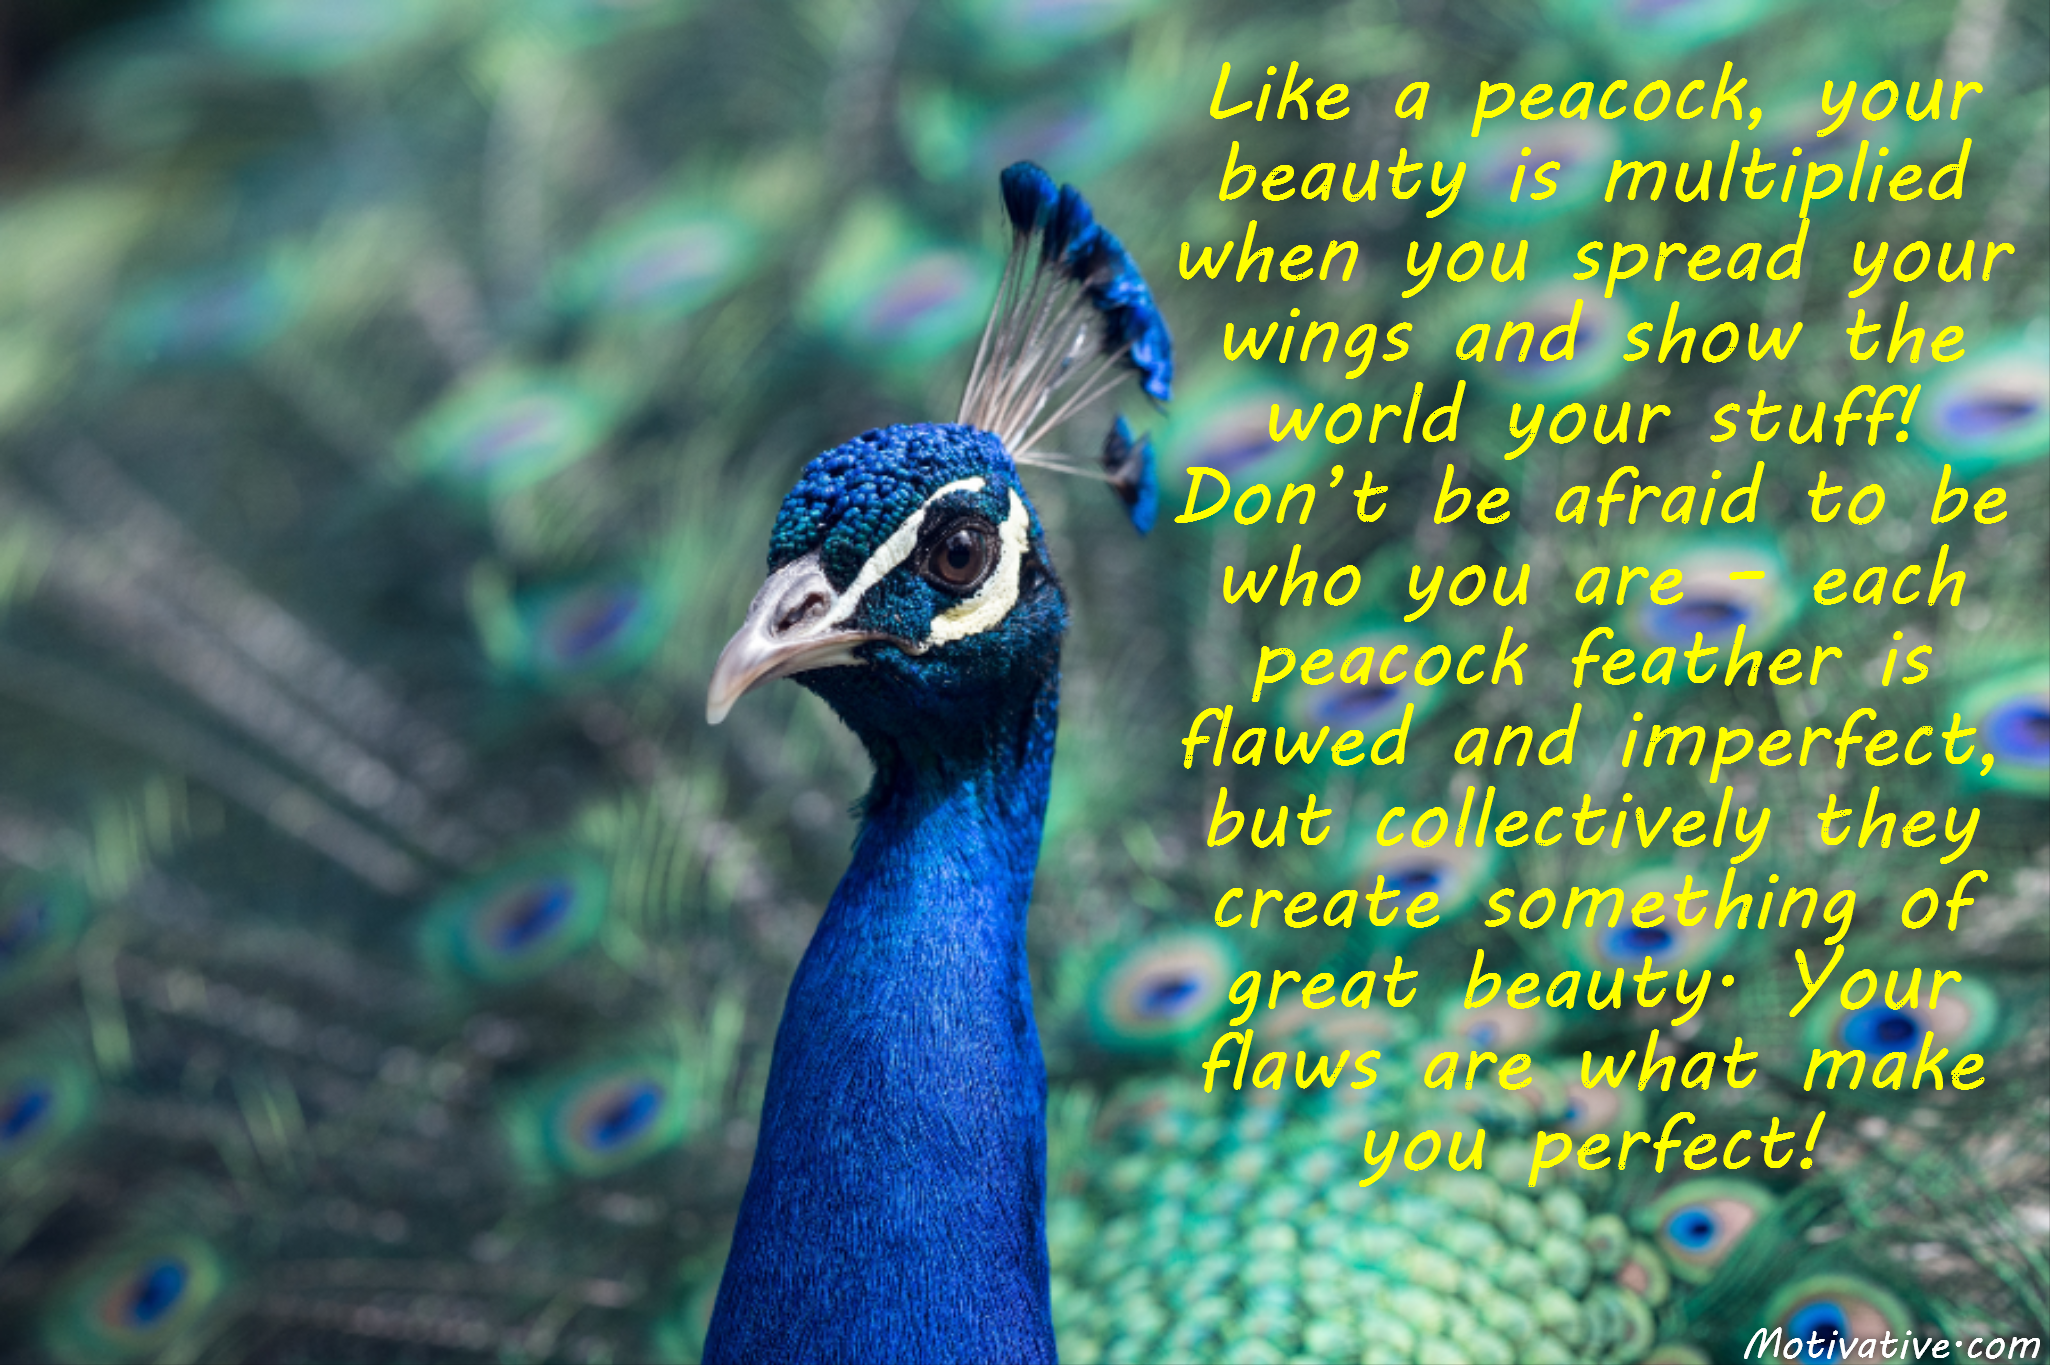 Like a peacock, your beauty is multiplied when you spread your wings and show the world your stuff!